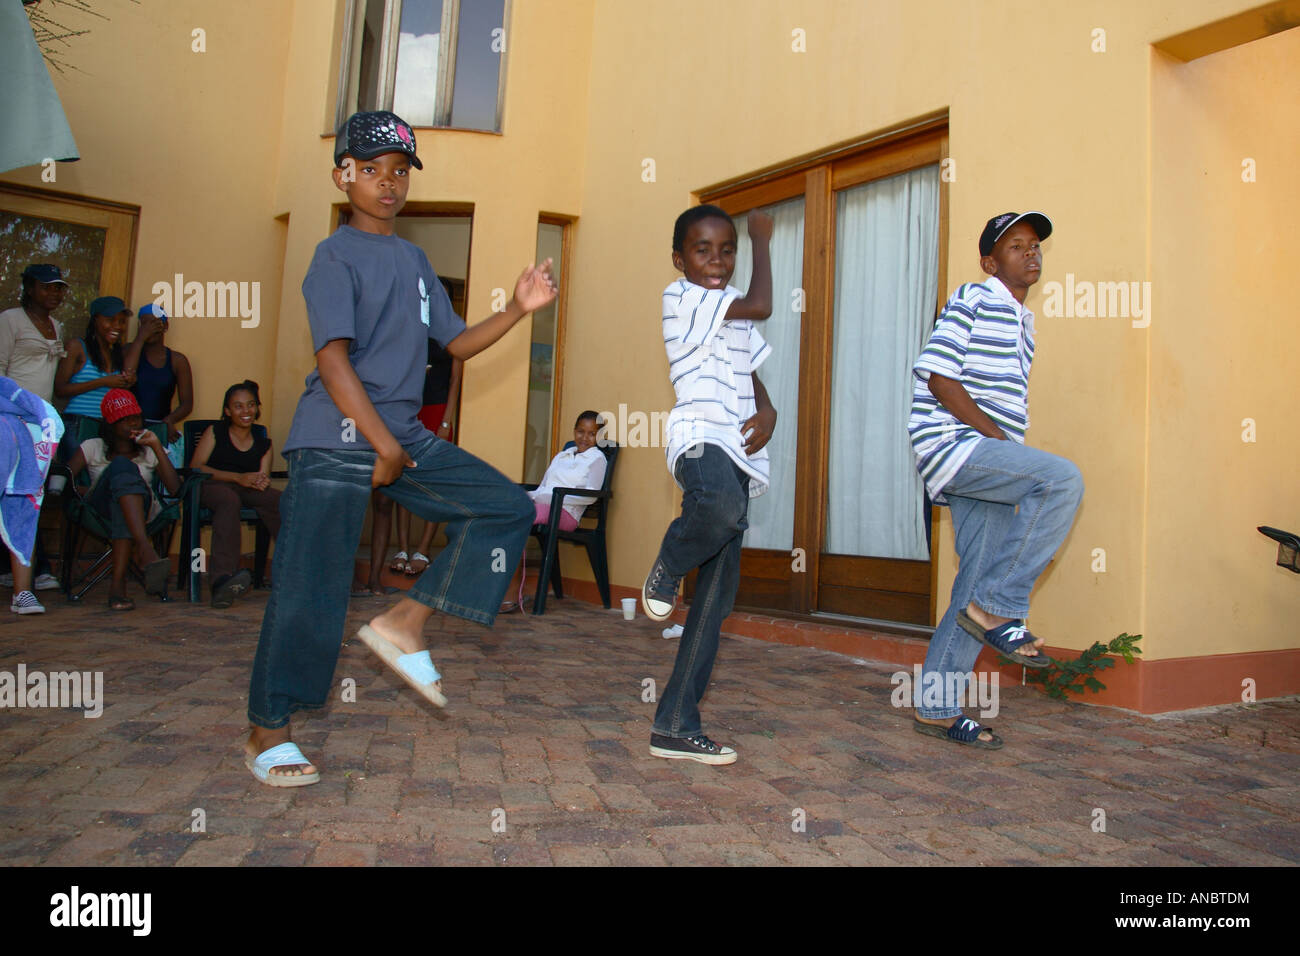 Young boys dancing at a party Stock Photo